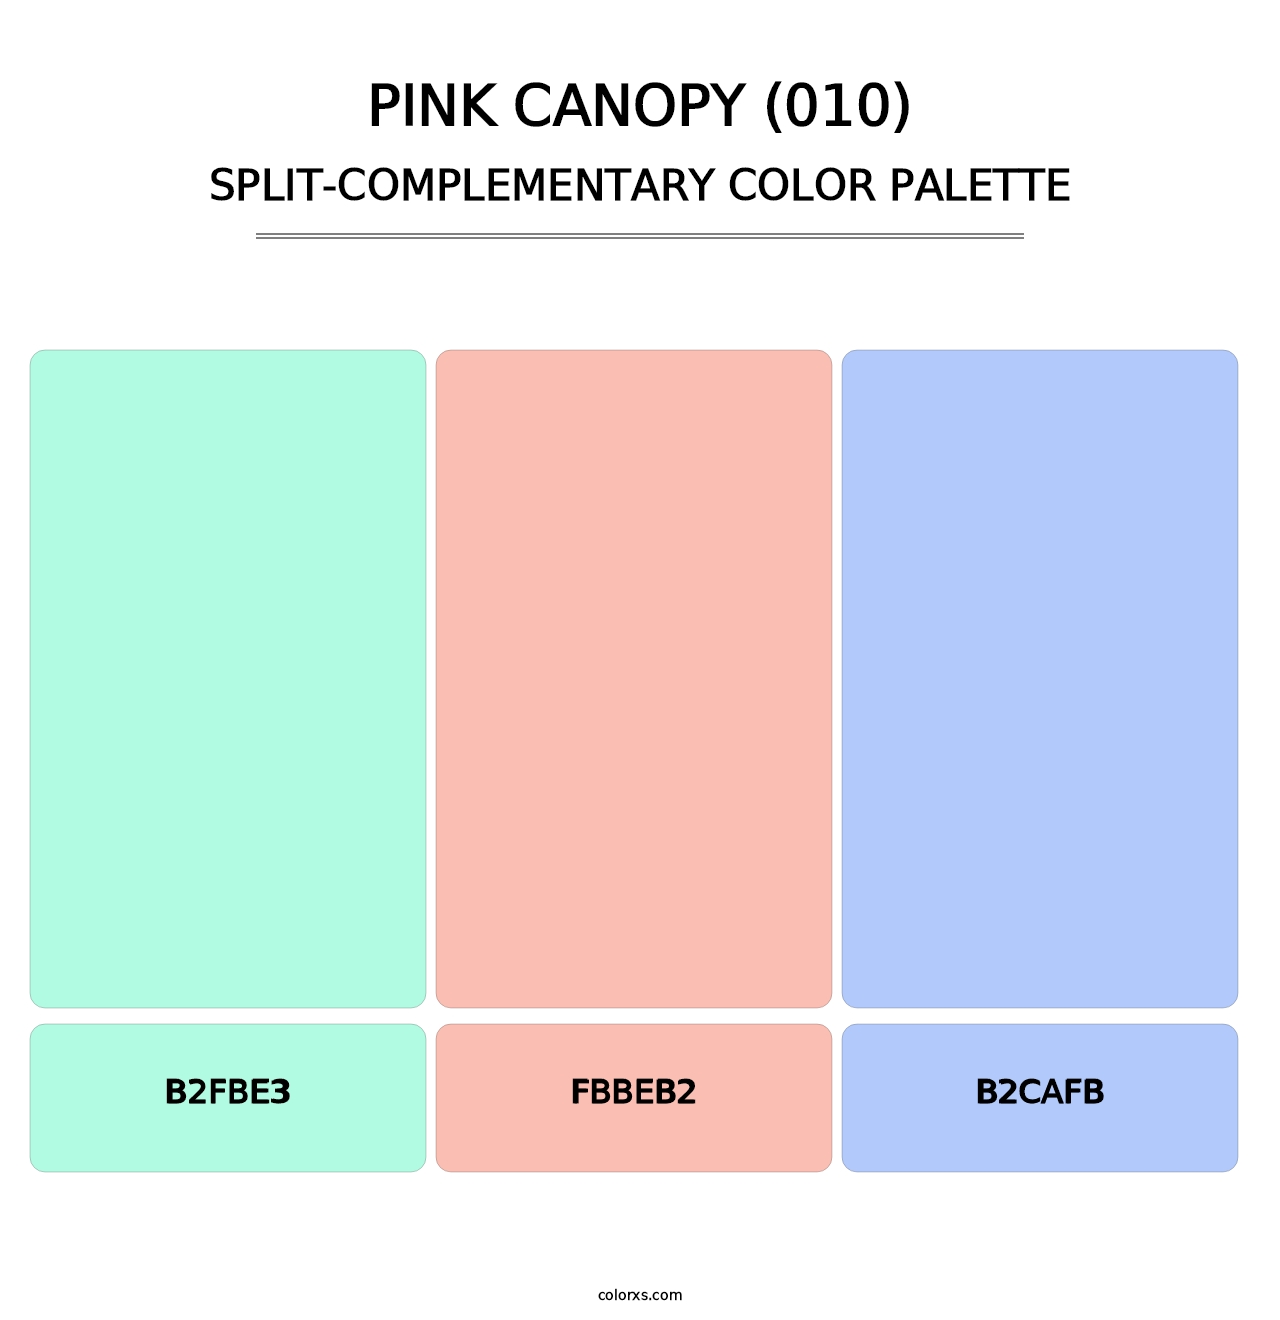 Pink Canopy (010) - Split-Complementary Color Palette